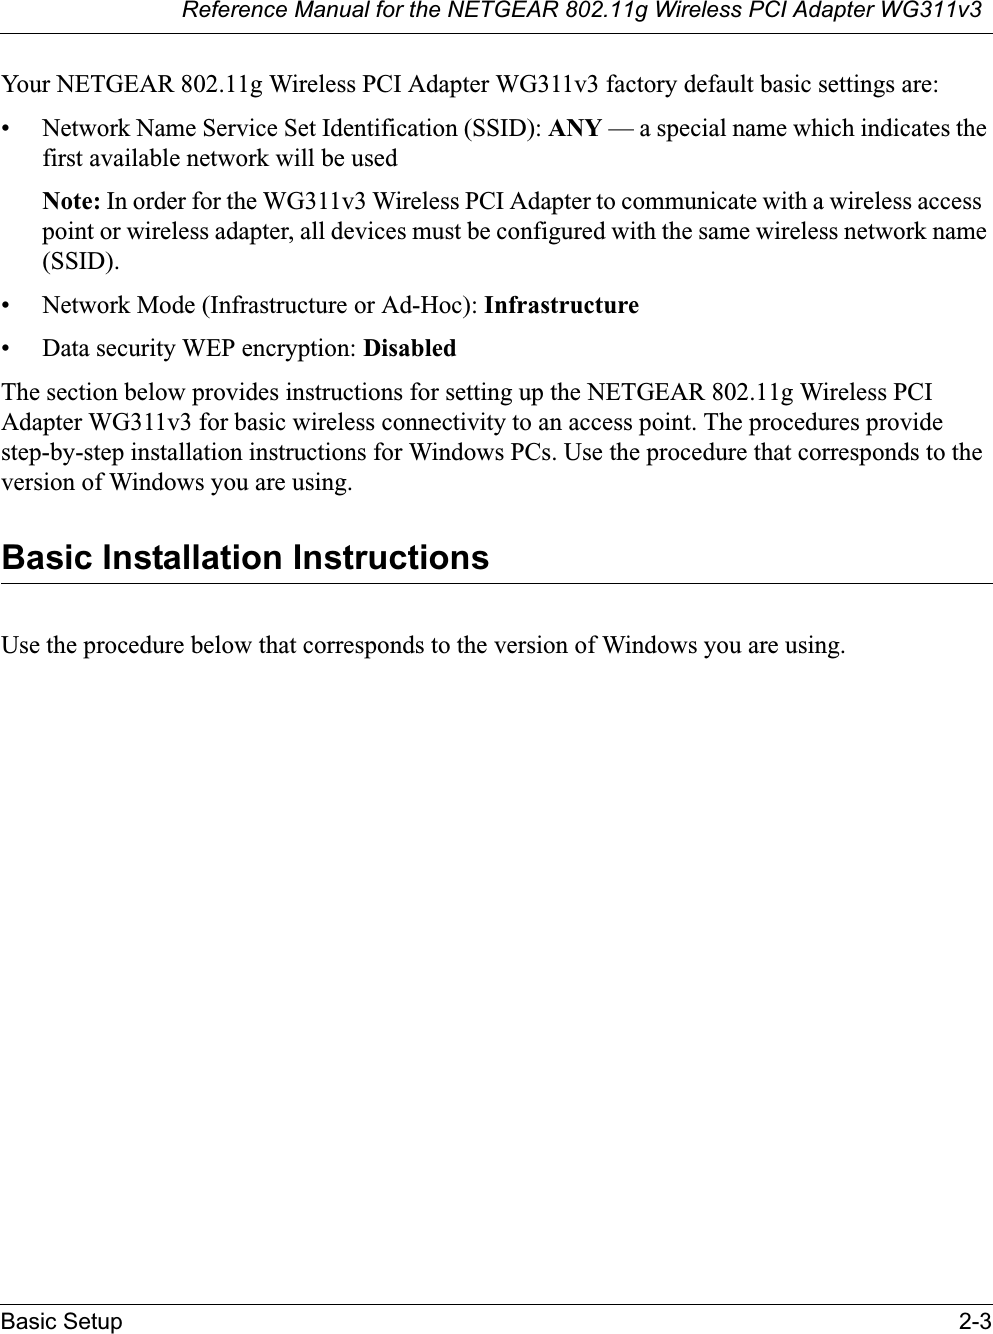 Reference Manual for the NETGEAR 802.11g Wireless PCI Adapter WG311v3Basic Setup 2-3Your NETGEAR 802.11g Wireless PCI Adapter WG311v3 factory default basic settings are: • Network Name Service Set Identification (SSID): ANY — a special name which indicates the first available network will be usedNote: In order for the WG311v3 Wireless PCI Adapter to communicate with a wireless access point or wireless adapter, all devices must be configured with the same wireless network name (SSID).• Network Mode (Infrastructure or Ad-Hoc): Infrastructure• Data security WEP encryption: DisabledThe section below provides instructions for setting up the NETGEAR 802.11g Wireless PCI Adapter WG311v3 for basic wireless connectivity to an access point. The procedures providestep-by-step installation instructions for Windows PCs. Use the procedure that corresponds to the version of Windows you are using.Basic Installation Instructions Use the procedure below that corresponds to the version of Windows you are using.